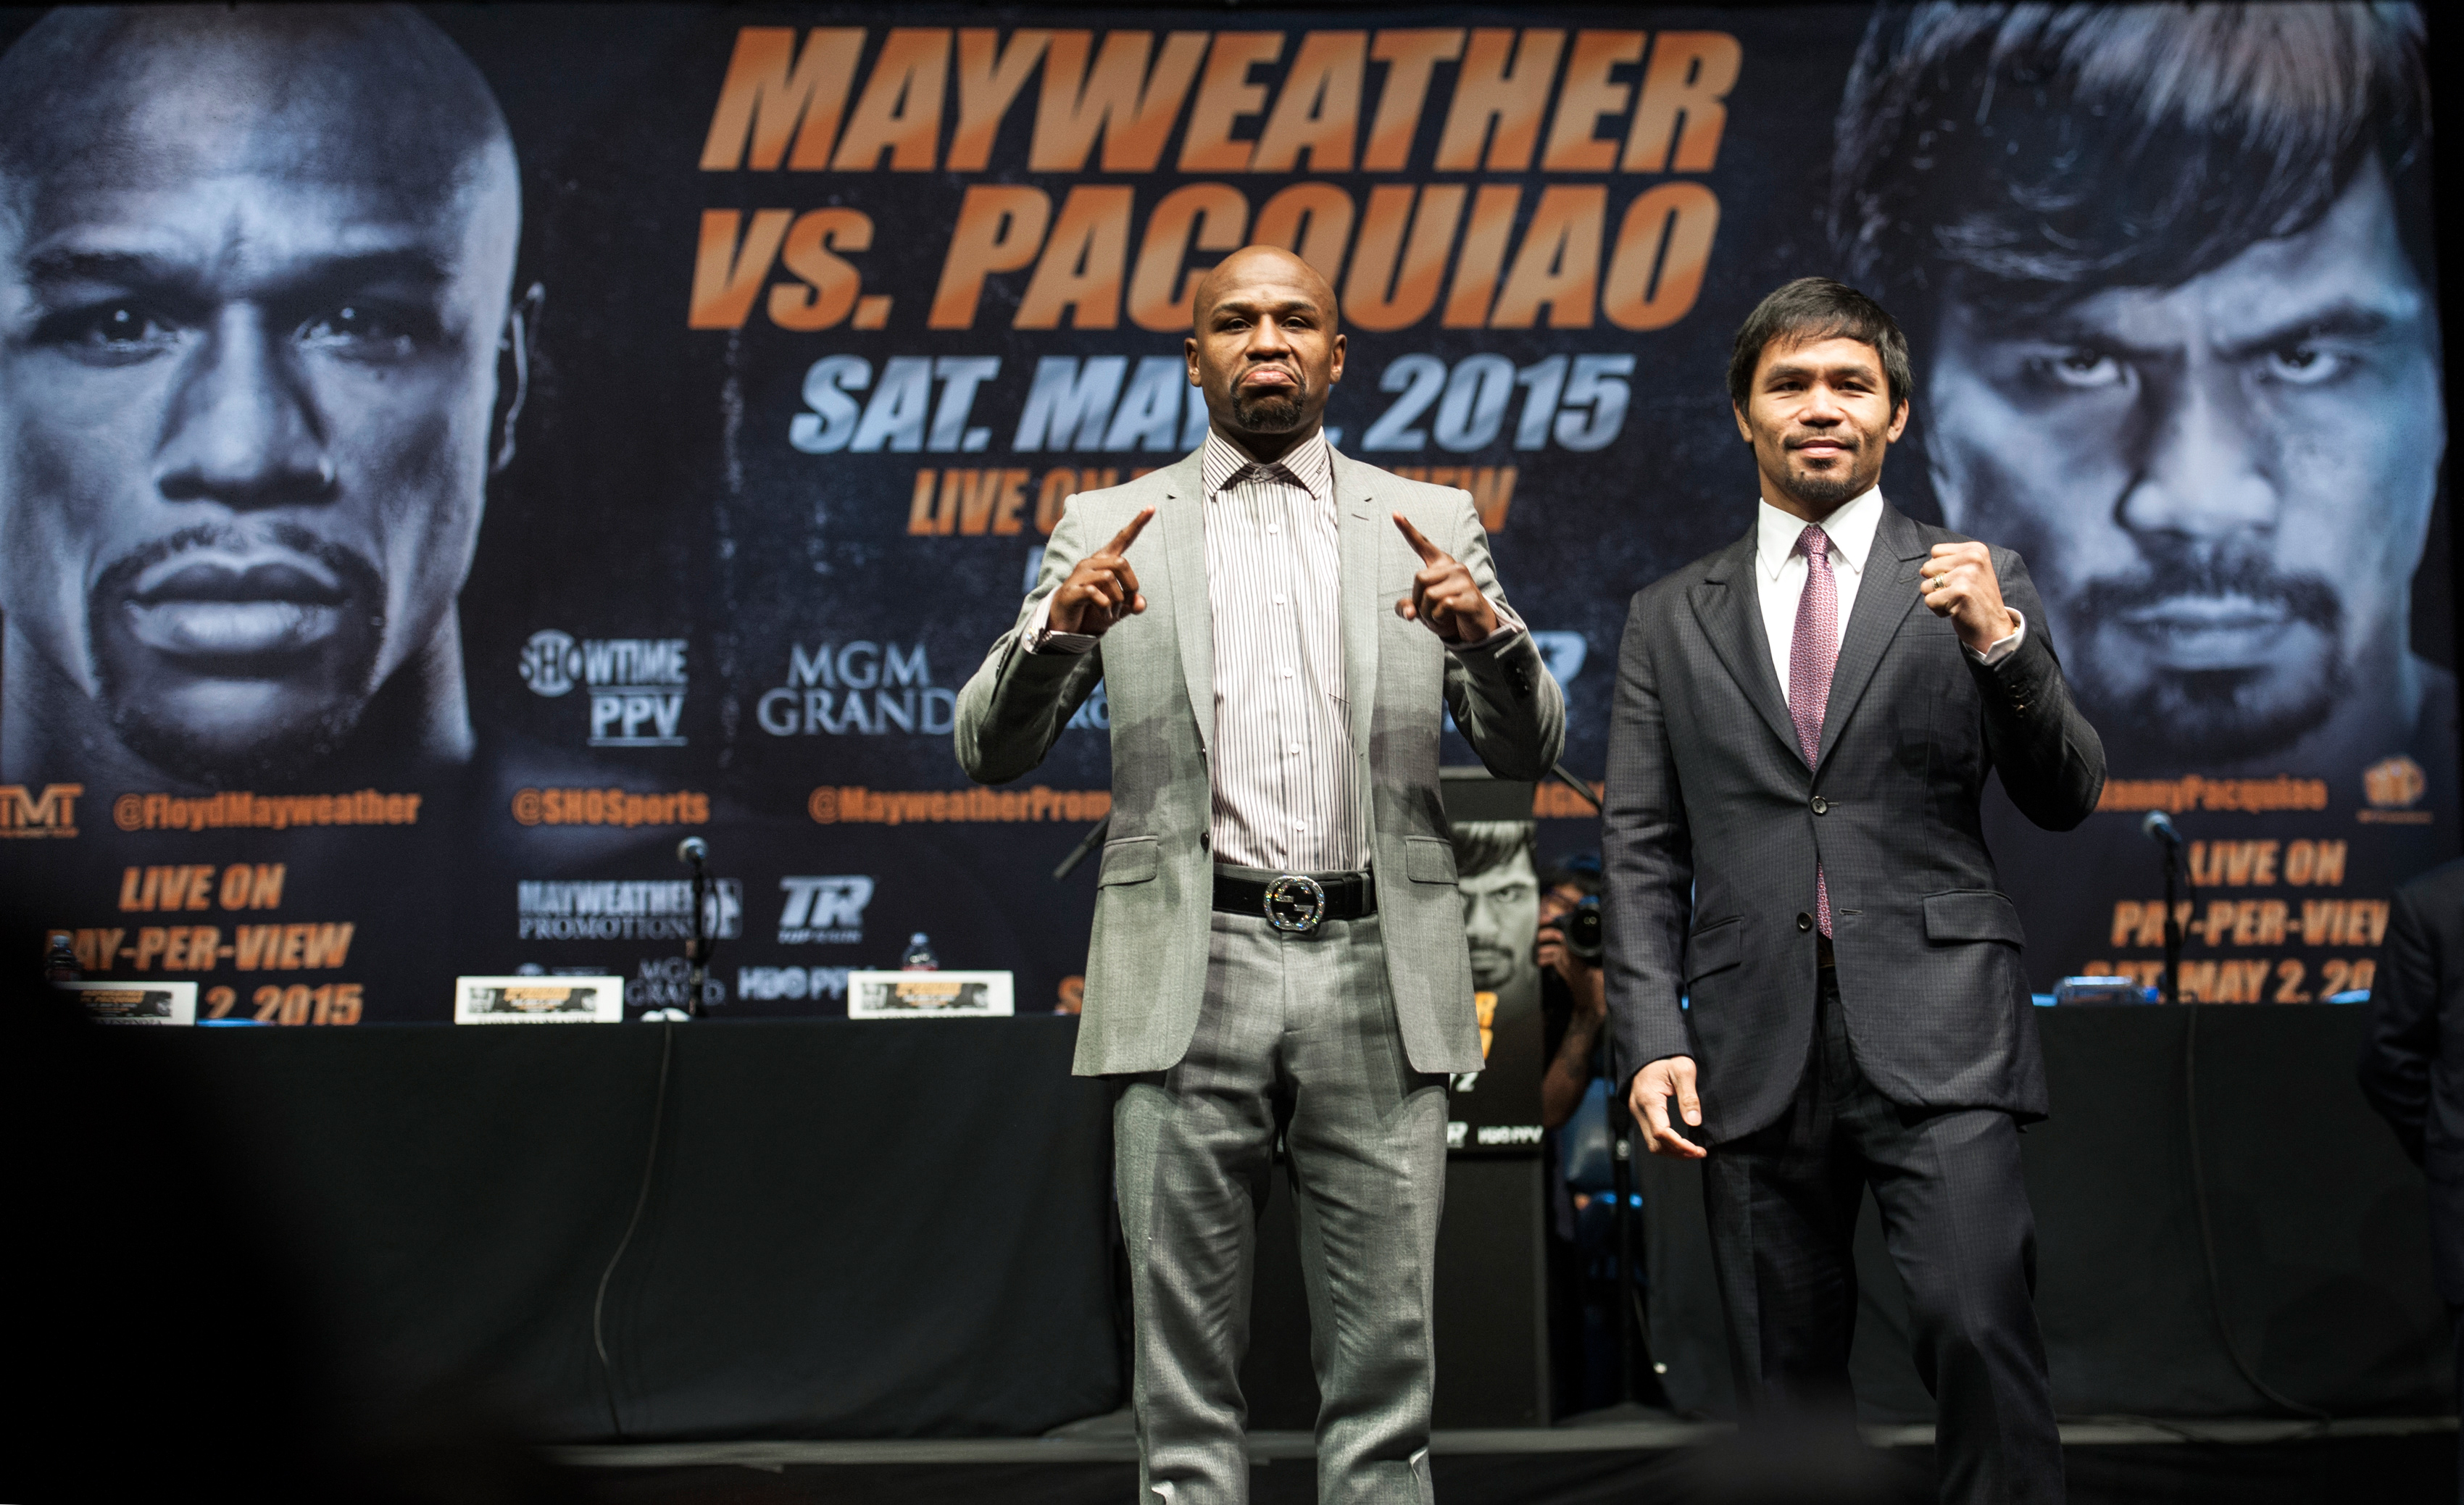 Floyd Mayweather Jr., and Manny Pacquiao strike their pose after a news conference. They are scheduled to box in the "Fight of the Century" in Las Vegas on May 2, 2015. (Ed Crisostomo&mdash;AP)